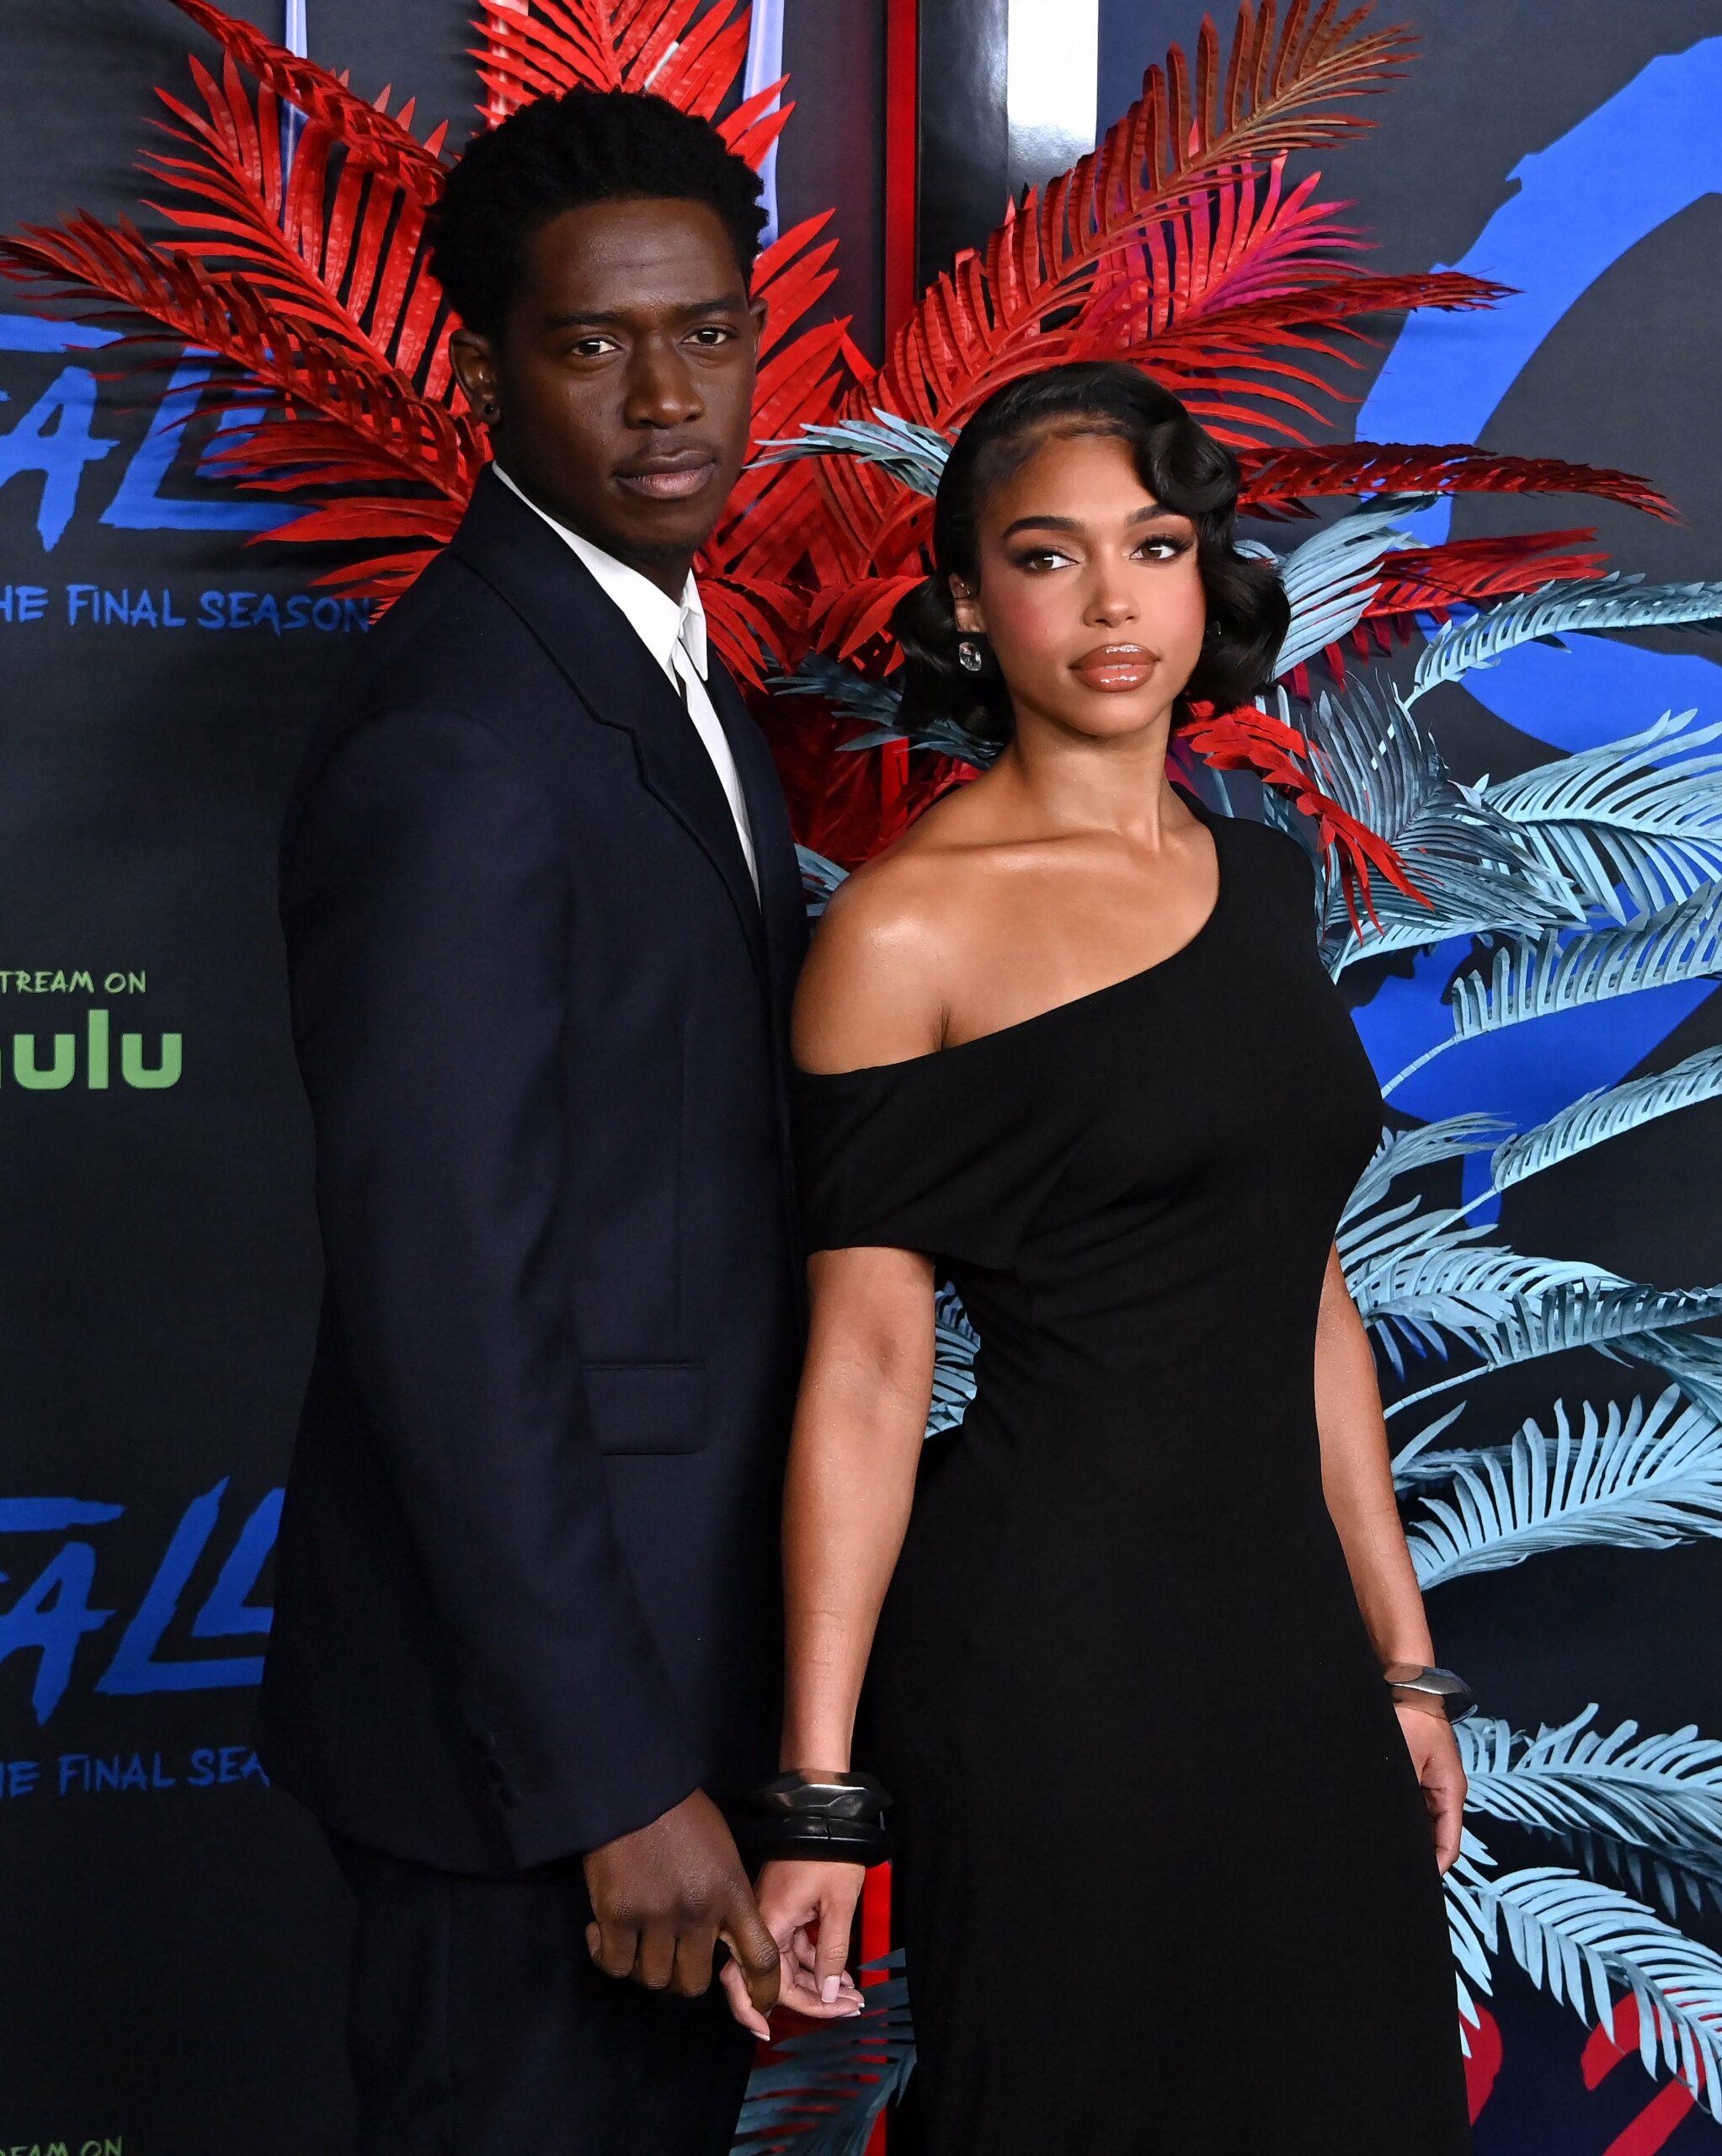 Fans Speculate About Lori Harvey And Damson Idris' Relationship